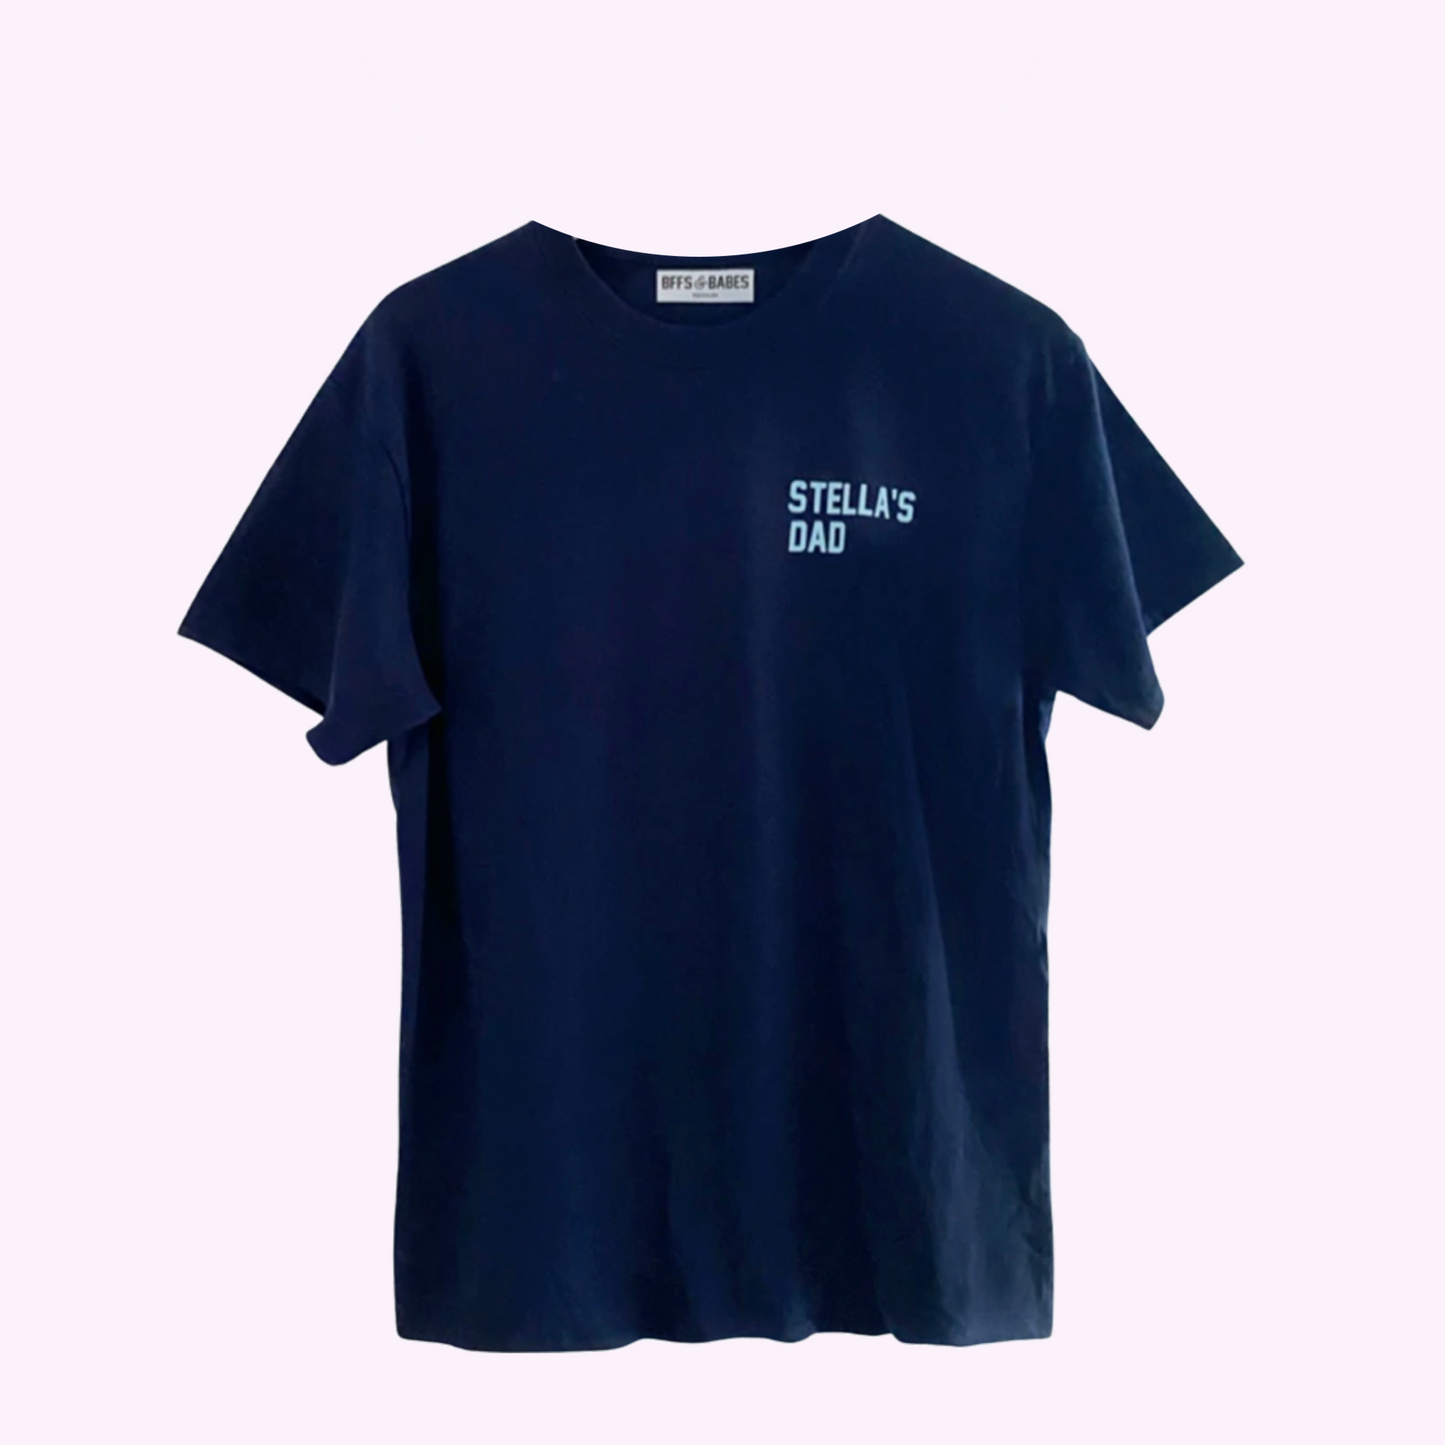 KEEP U CLOSE ♡ personalized t-shirt in navy